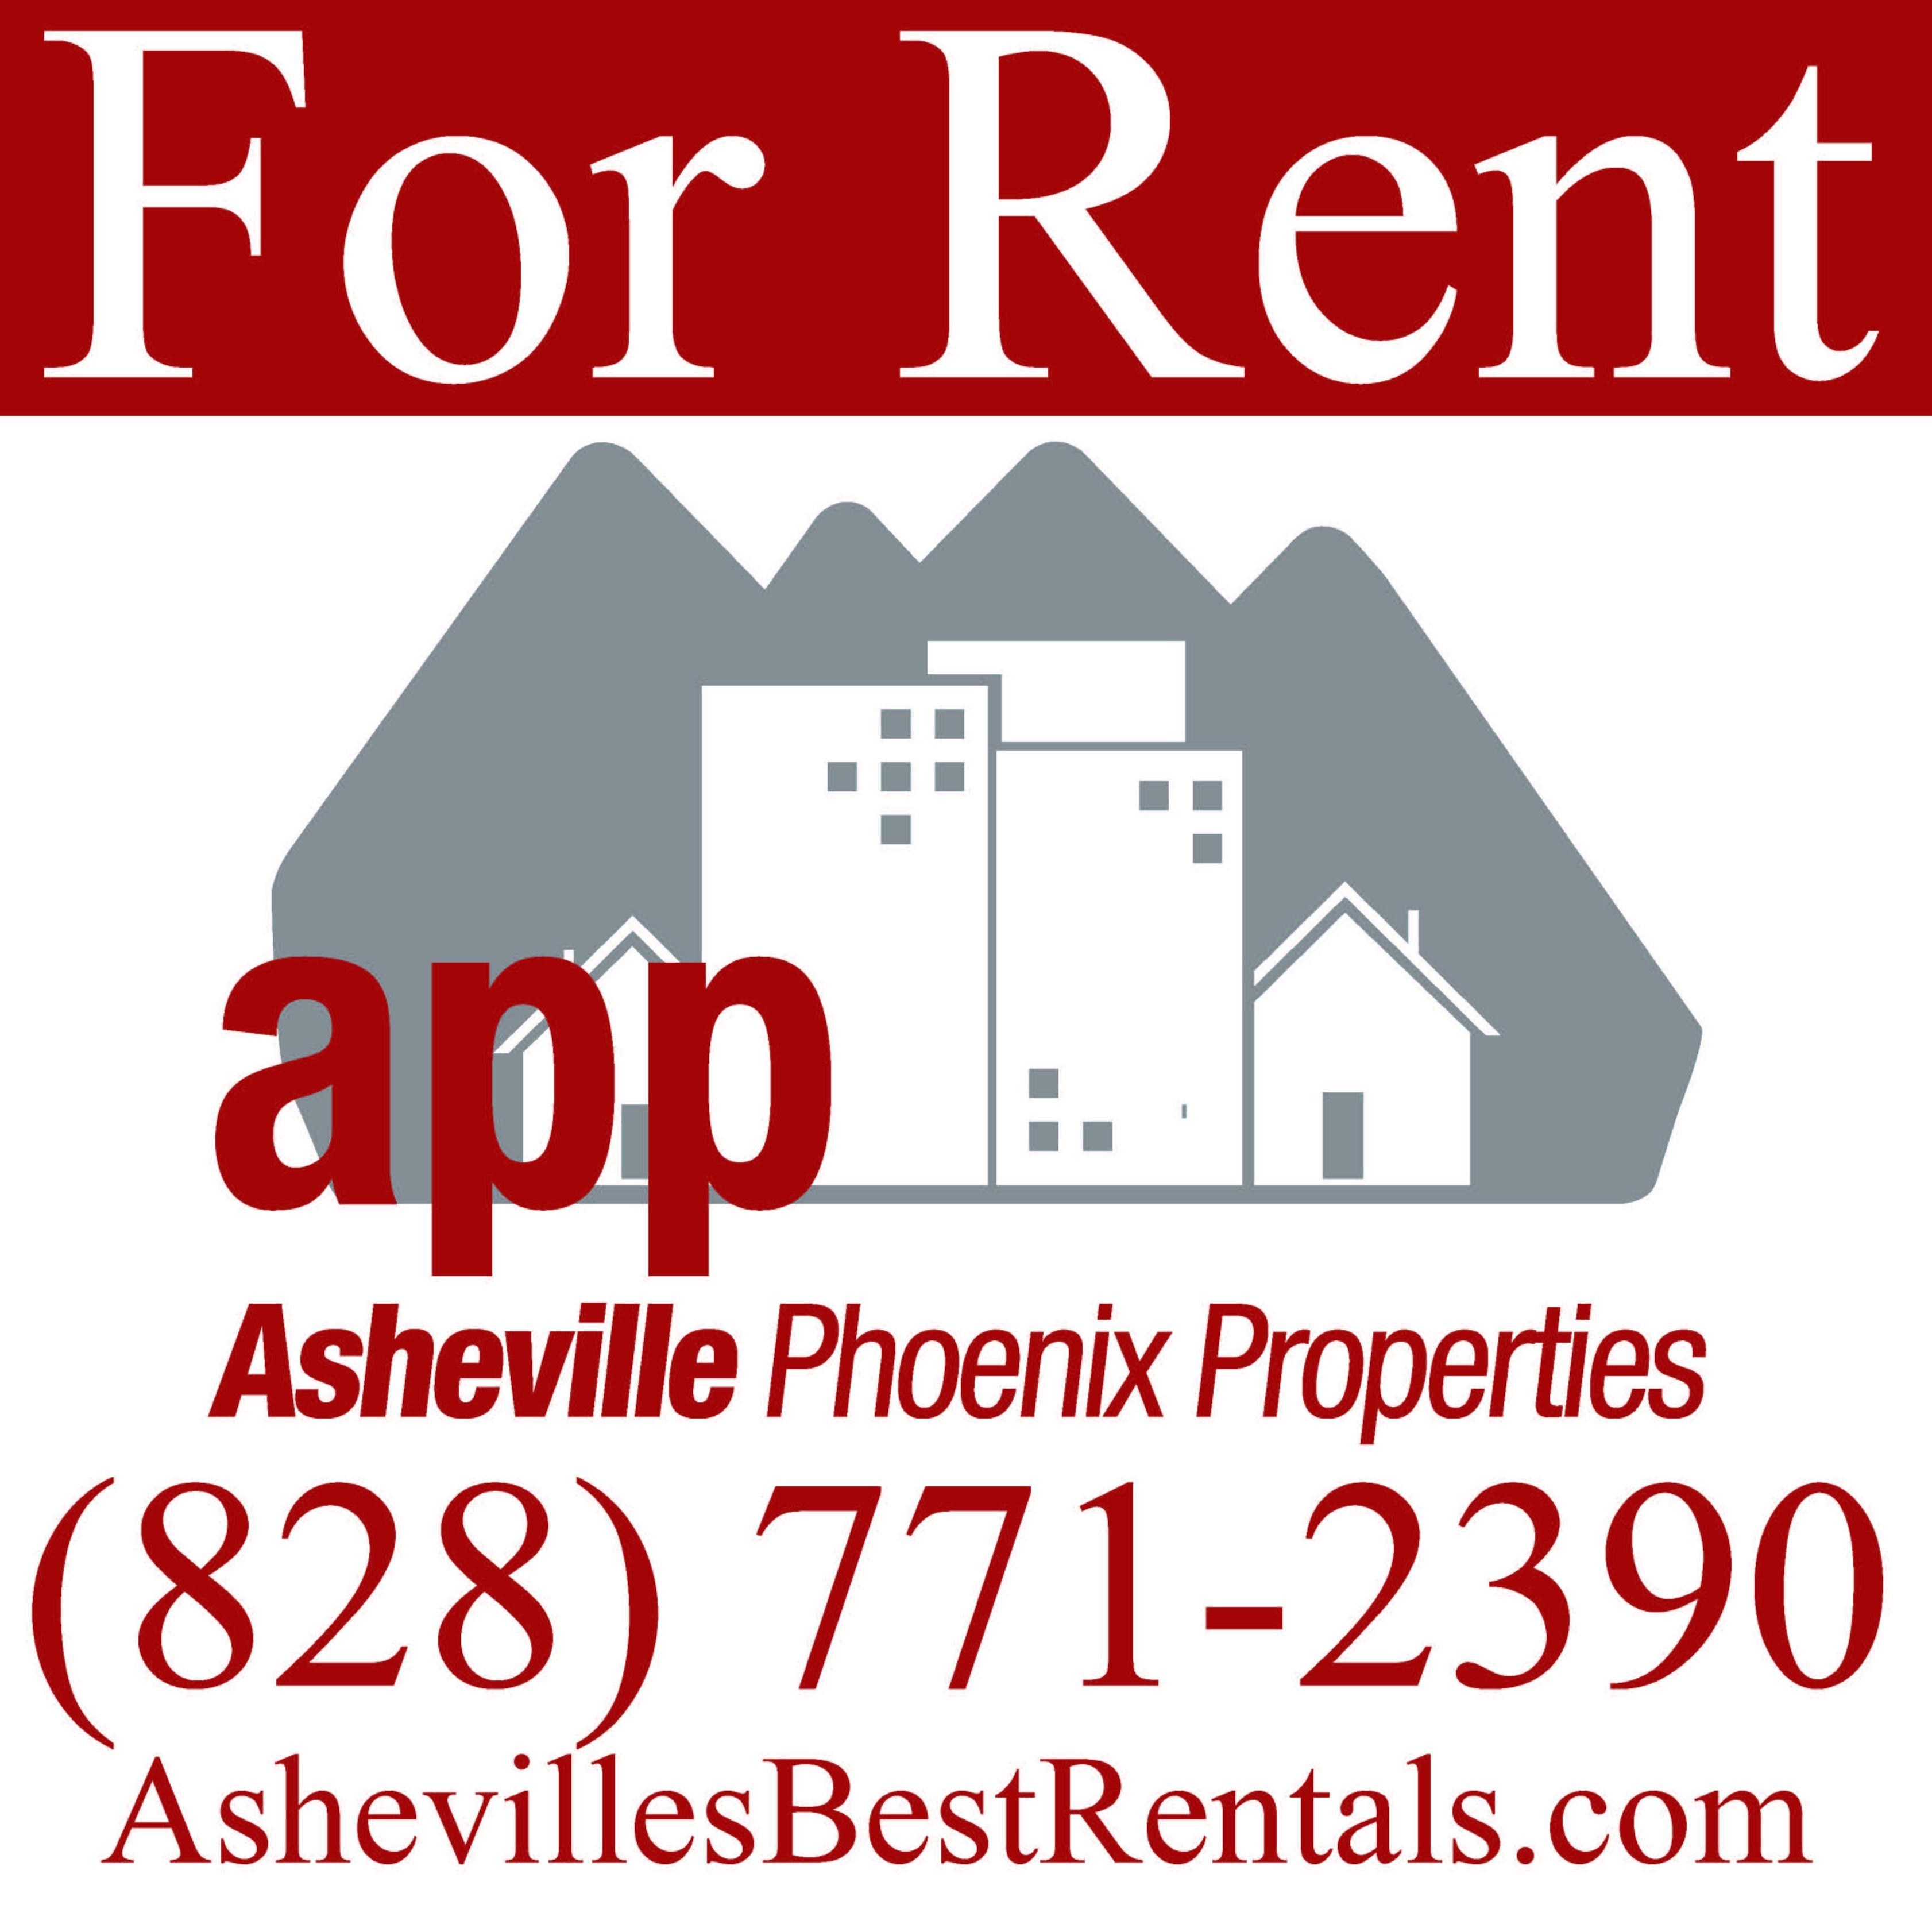 One of Asheville's Largest Property Management Companies!  #ashevillerentals #phoenixproperties #ashevillepropertymanagement  #ashevillesbestrentals